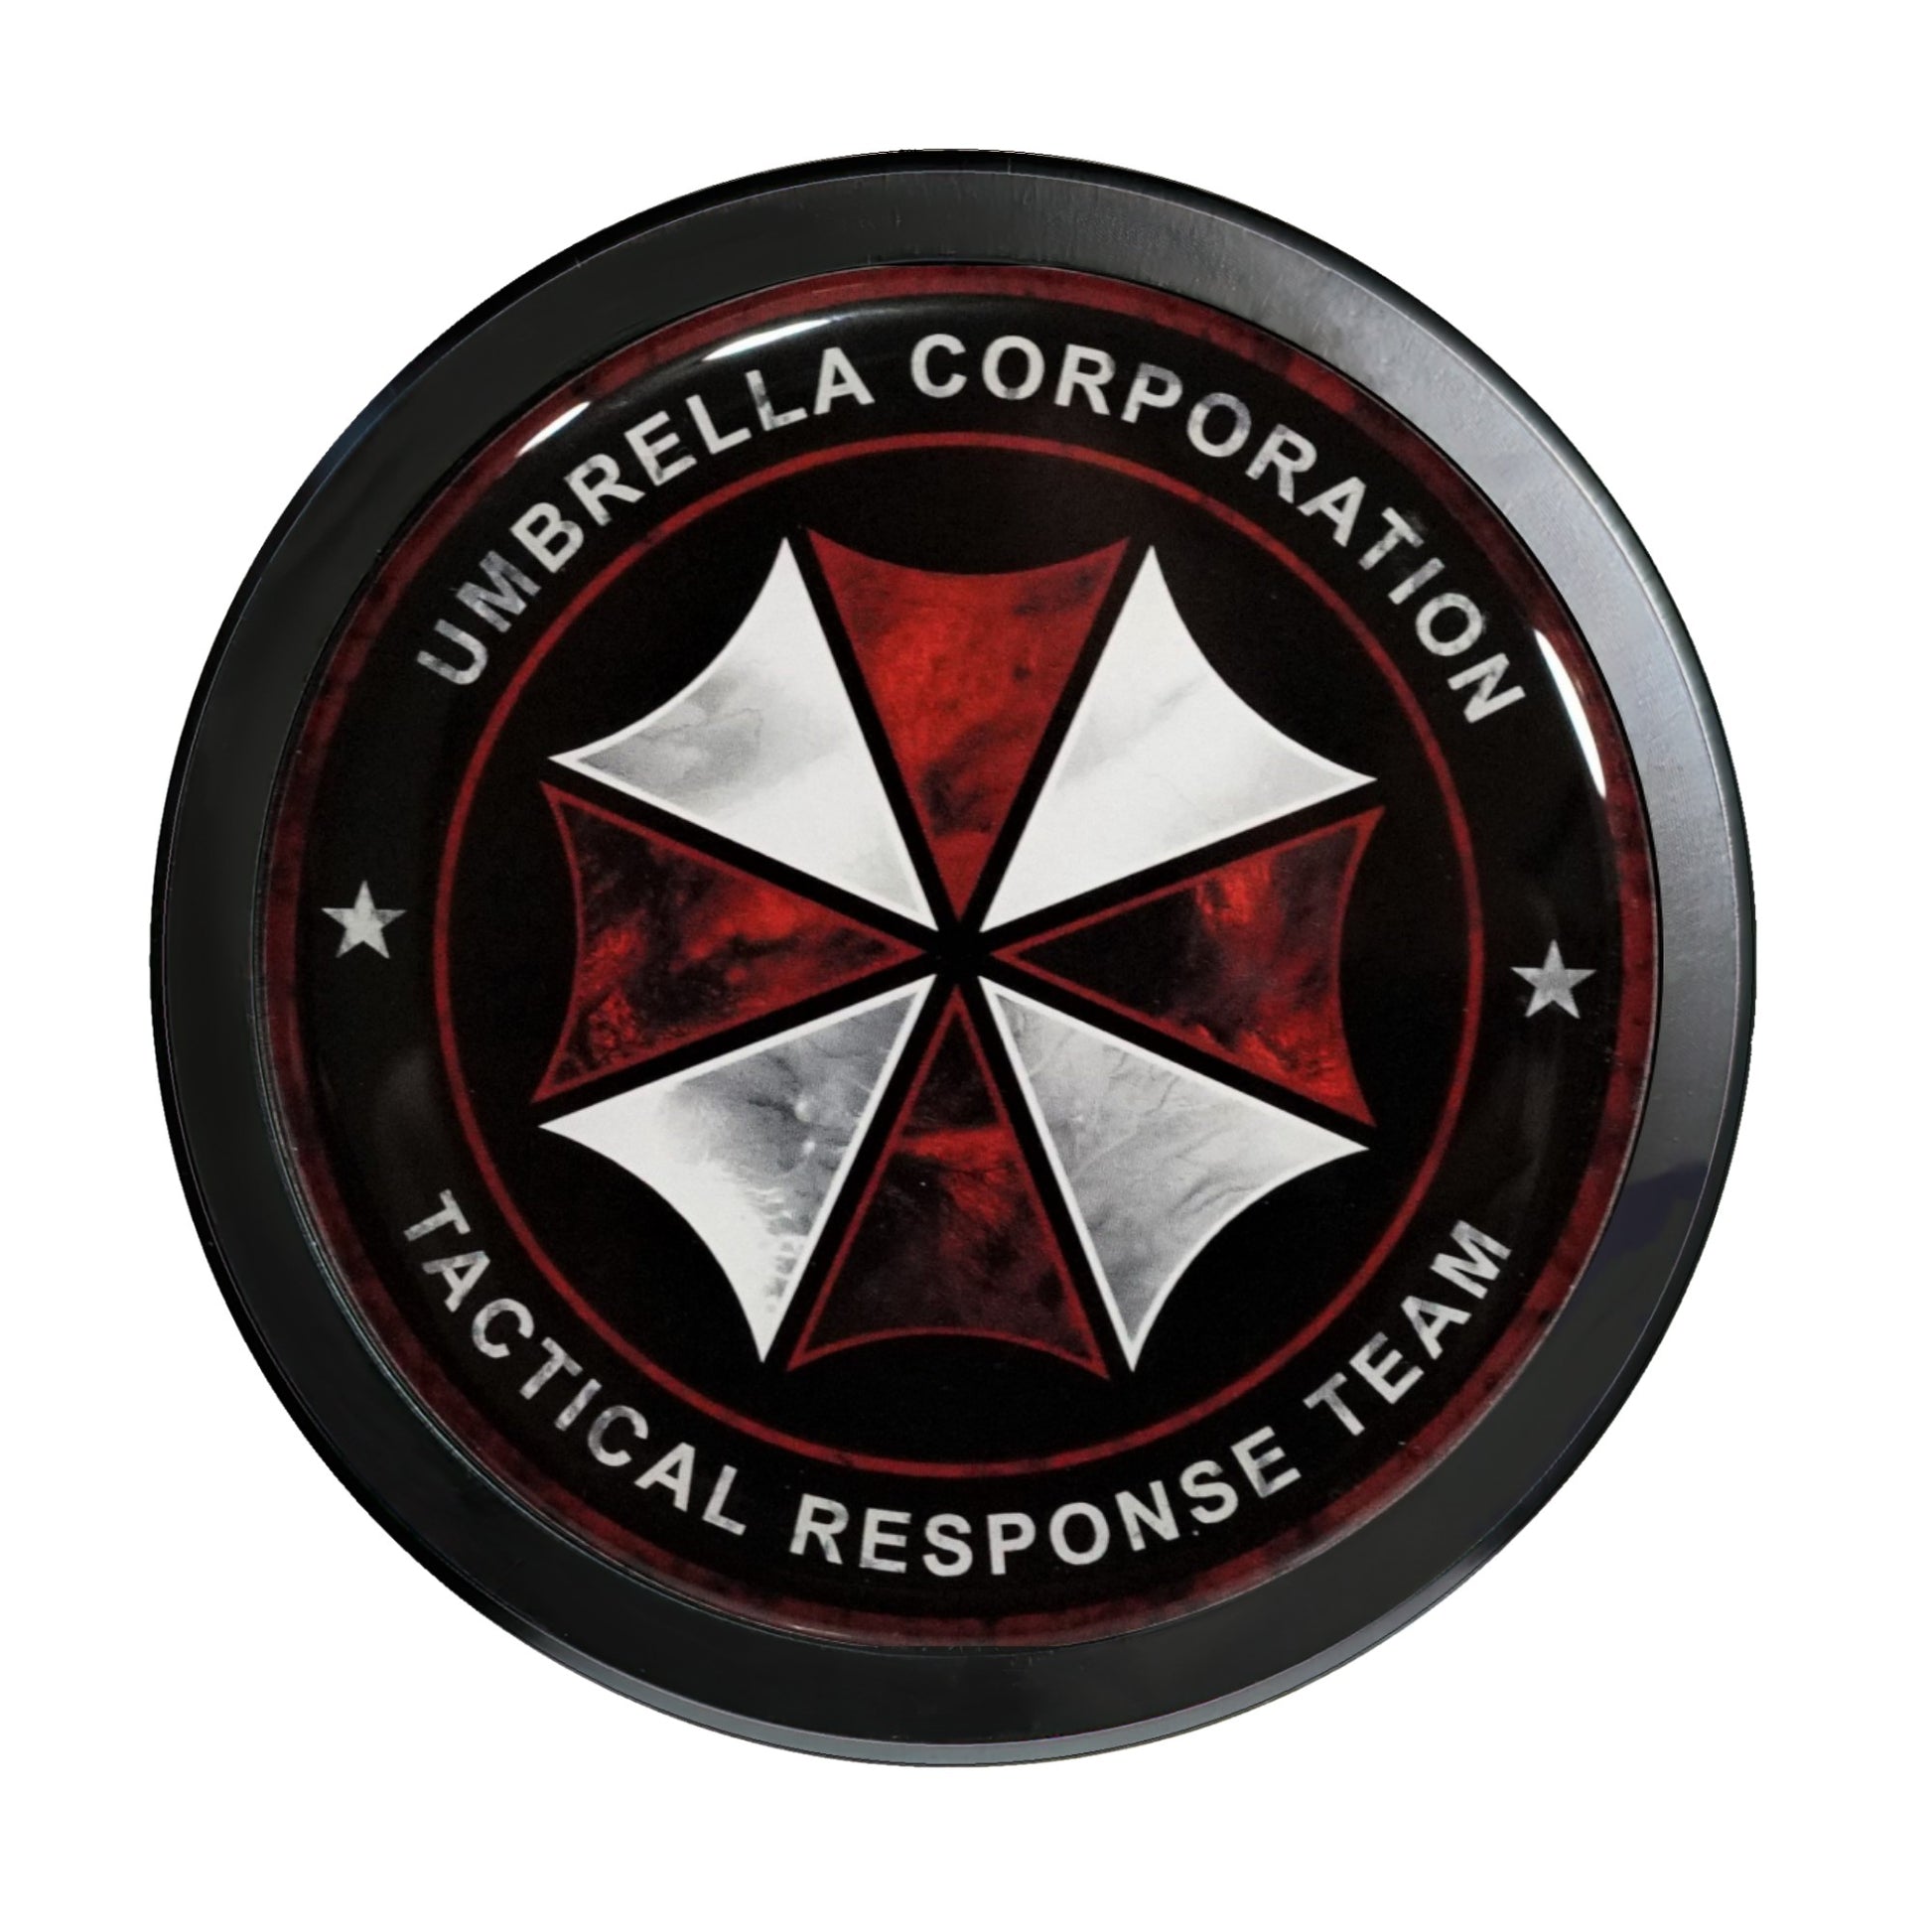 Umbrella Corp Group Fan Submitted Badge Resident Evil Fan Patch Emblem Decal 